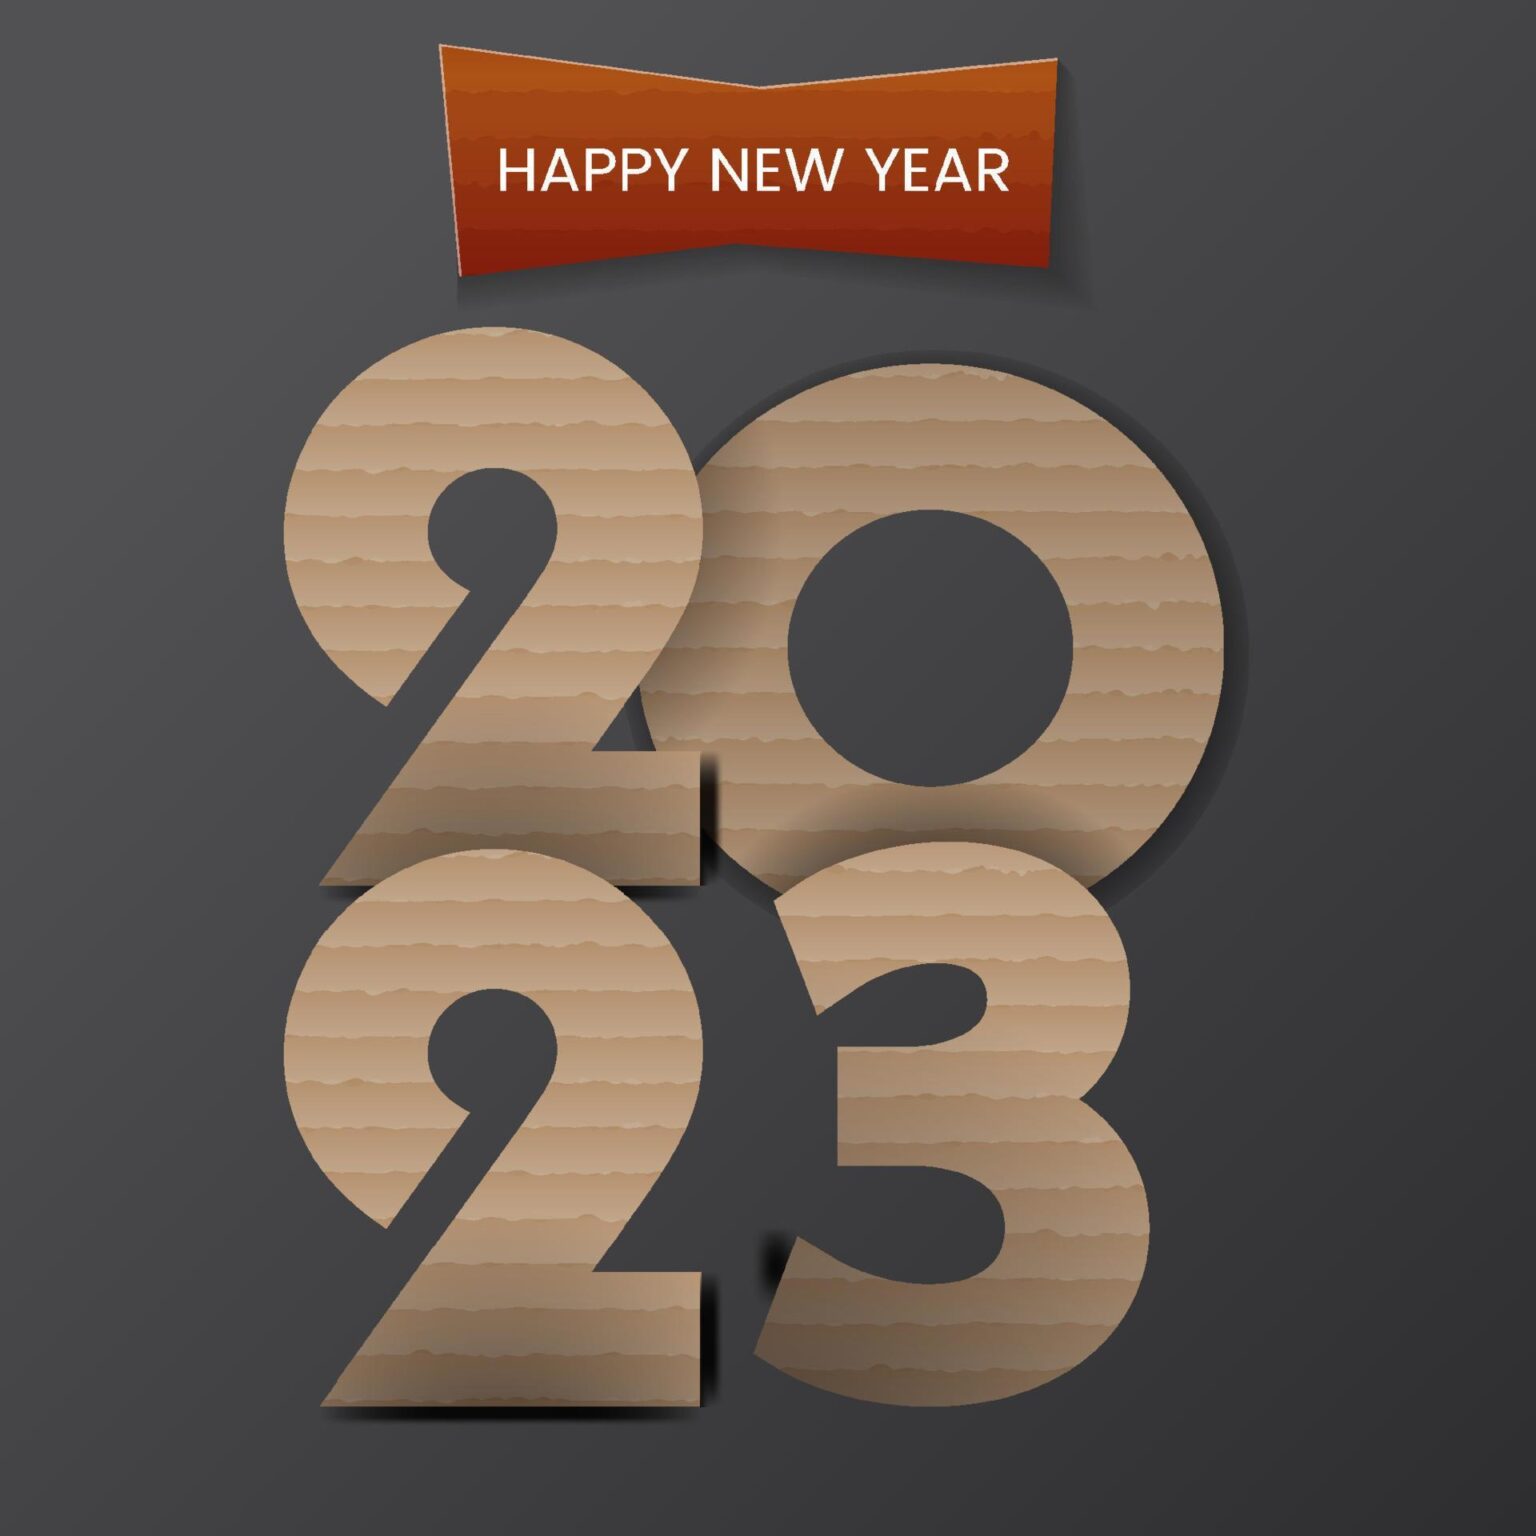 Happy New Year 2023 Text Design Pattern Paper Cut Typography Alphabet Letters And Numbers Illustration Free Vector